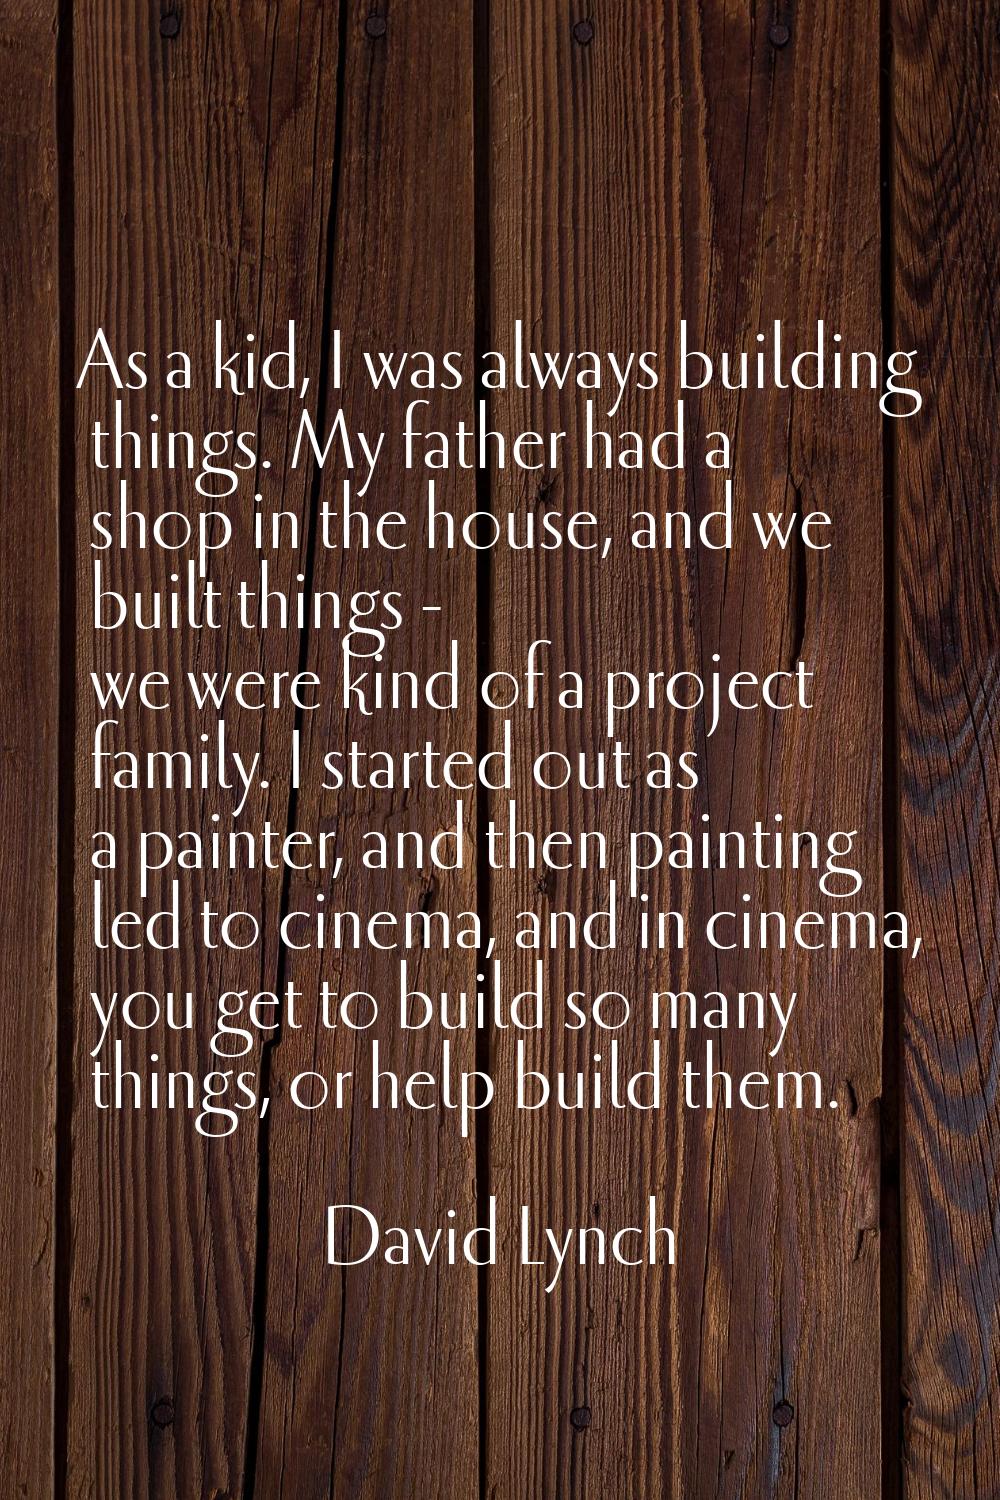 As a kid, I was always building things. My father had a shop in the house, and we built things - we